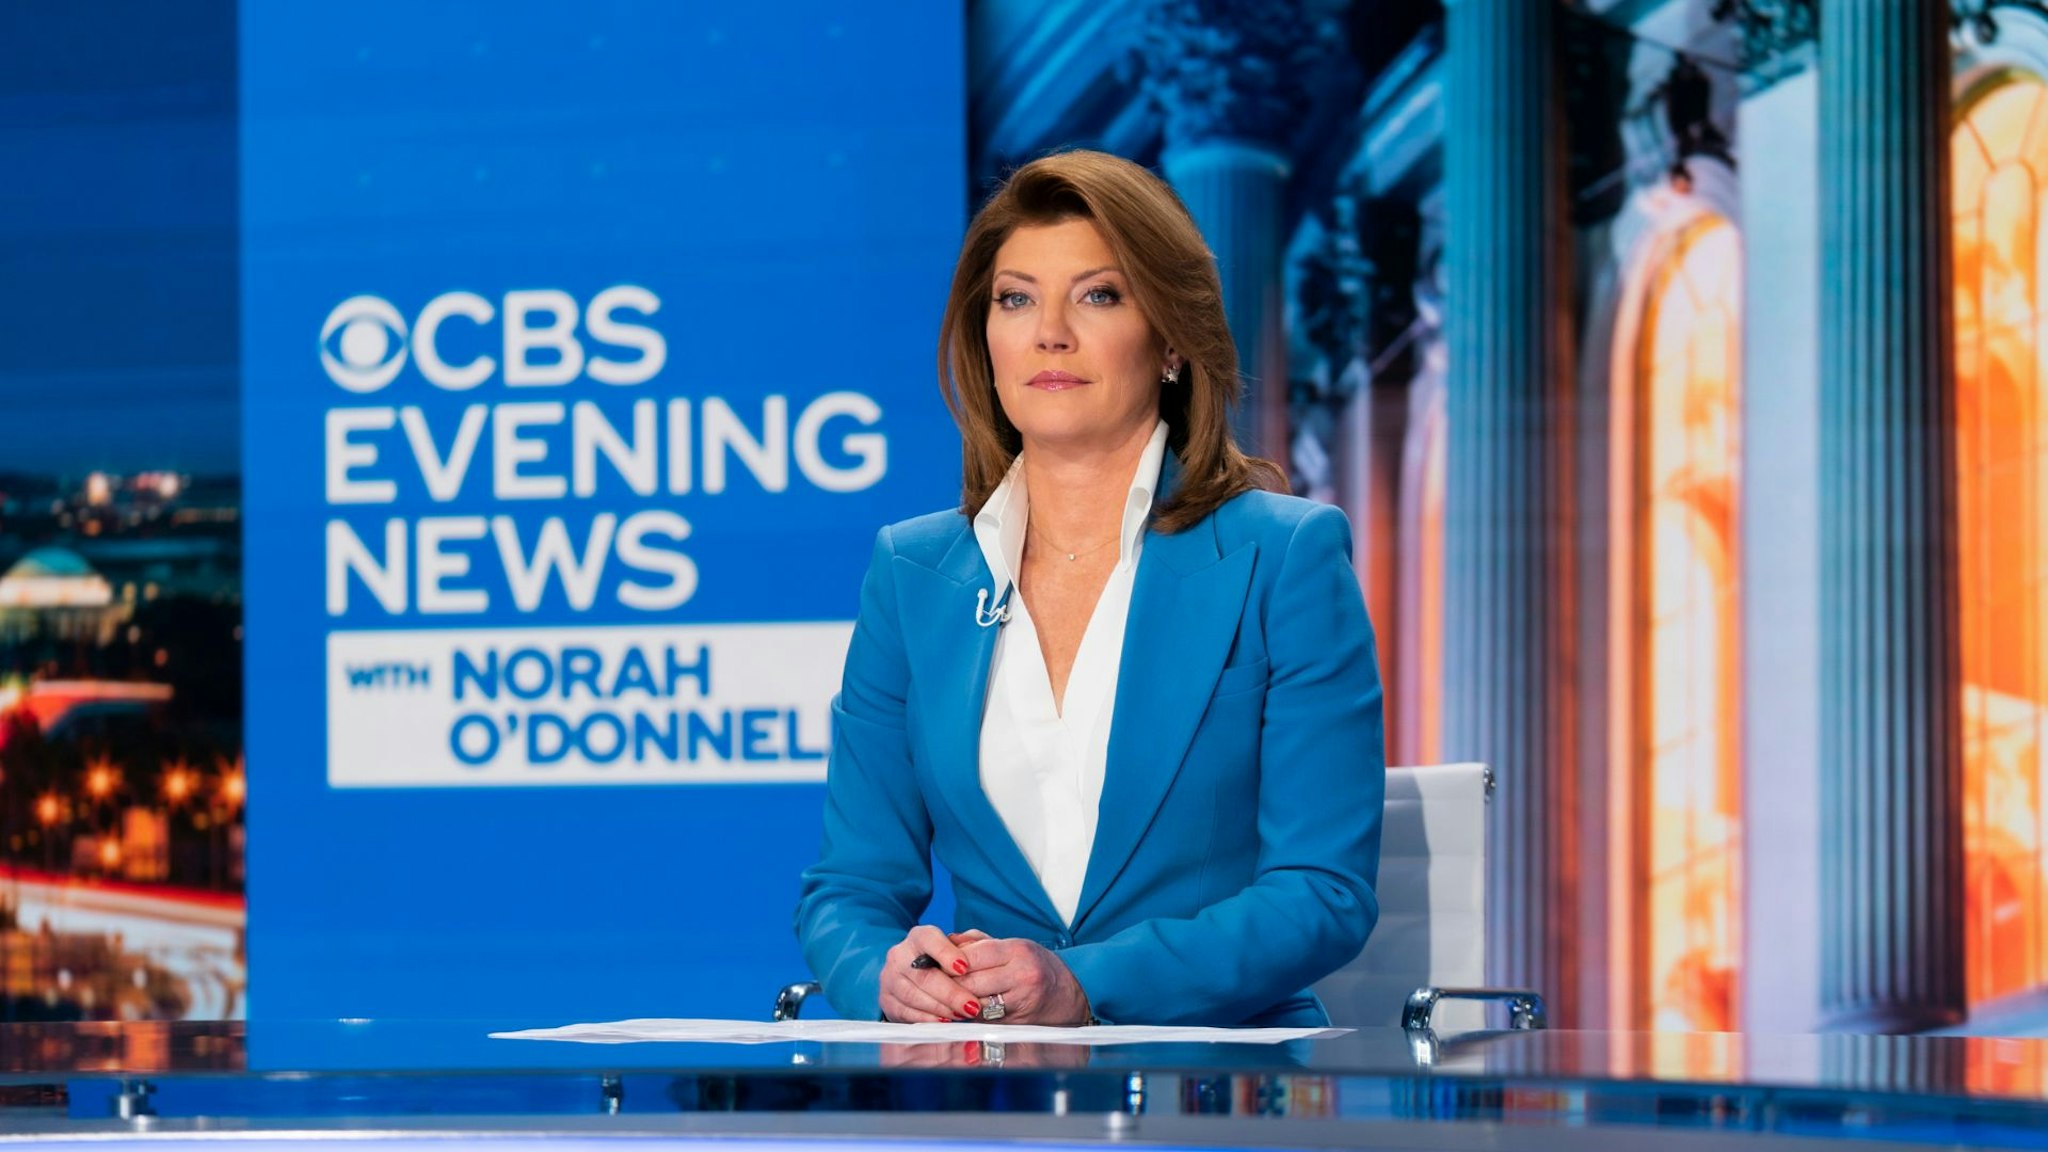 WASHINGTON - JANUARY 20: CBS Evening News with Norah O'Donnell broadcasts live from Washington DC with continued coverage on Inauguration 2021.